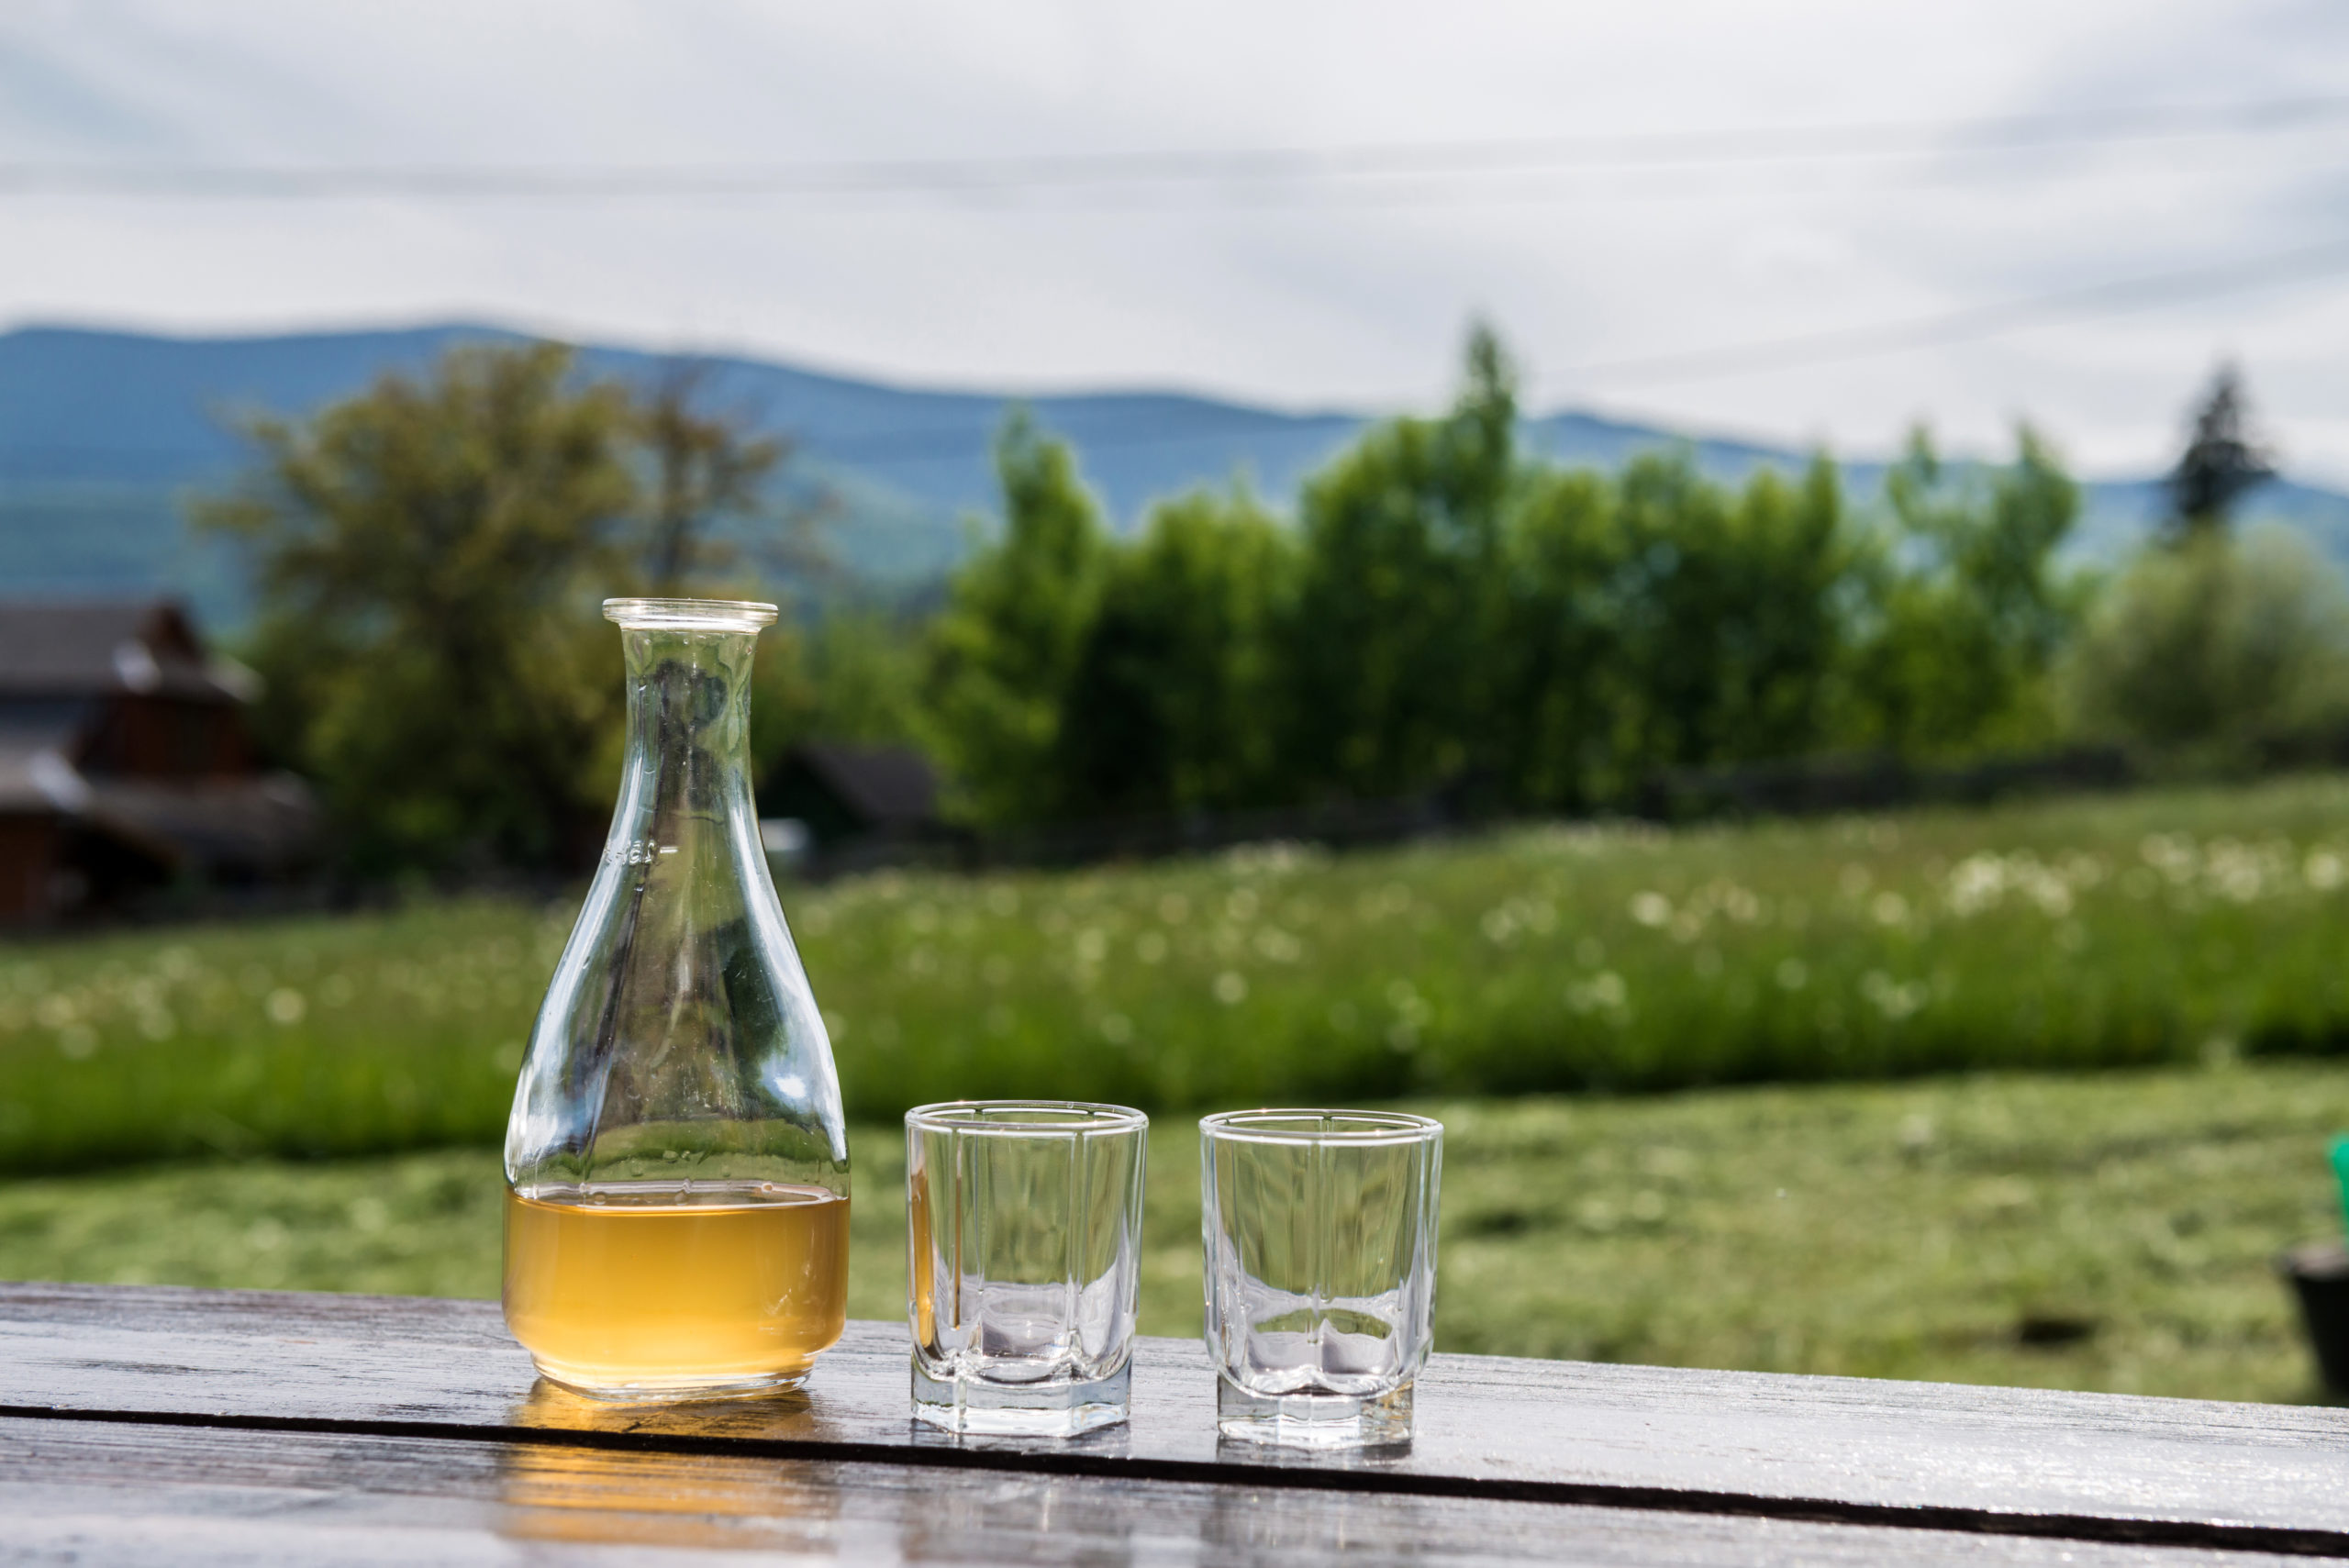 Wayne Gibbons Sweet Yellow Clover by Allen Martin – 2021 National Mead Maker of the Year